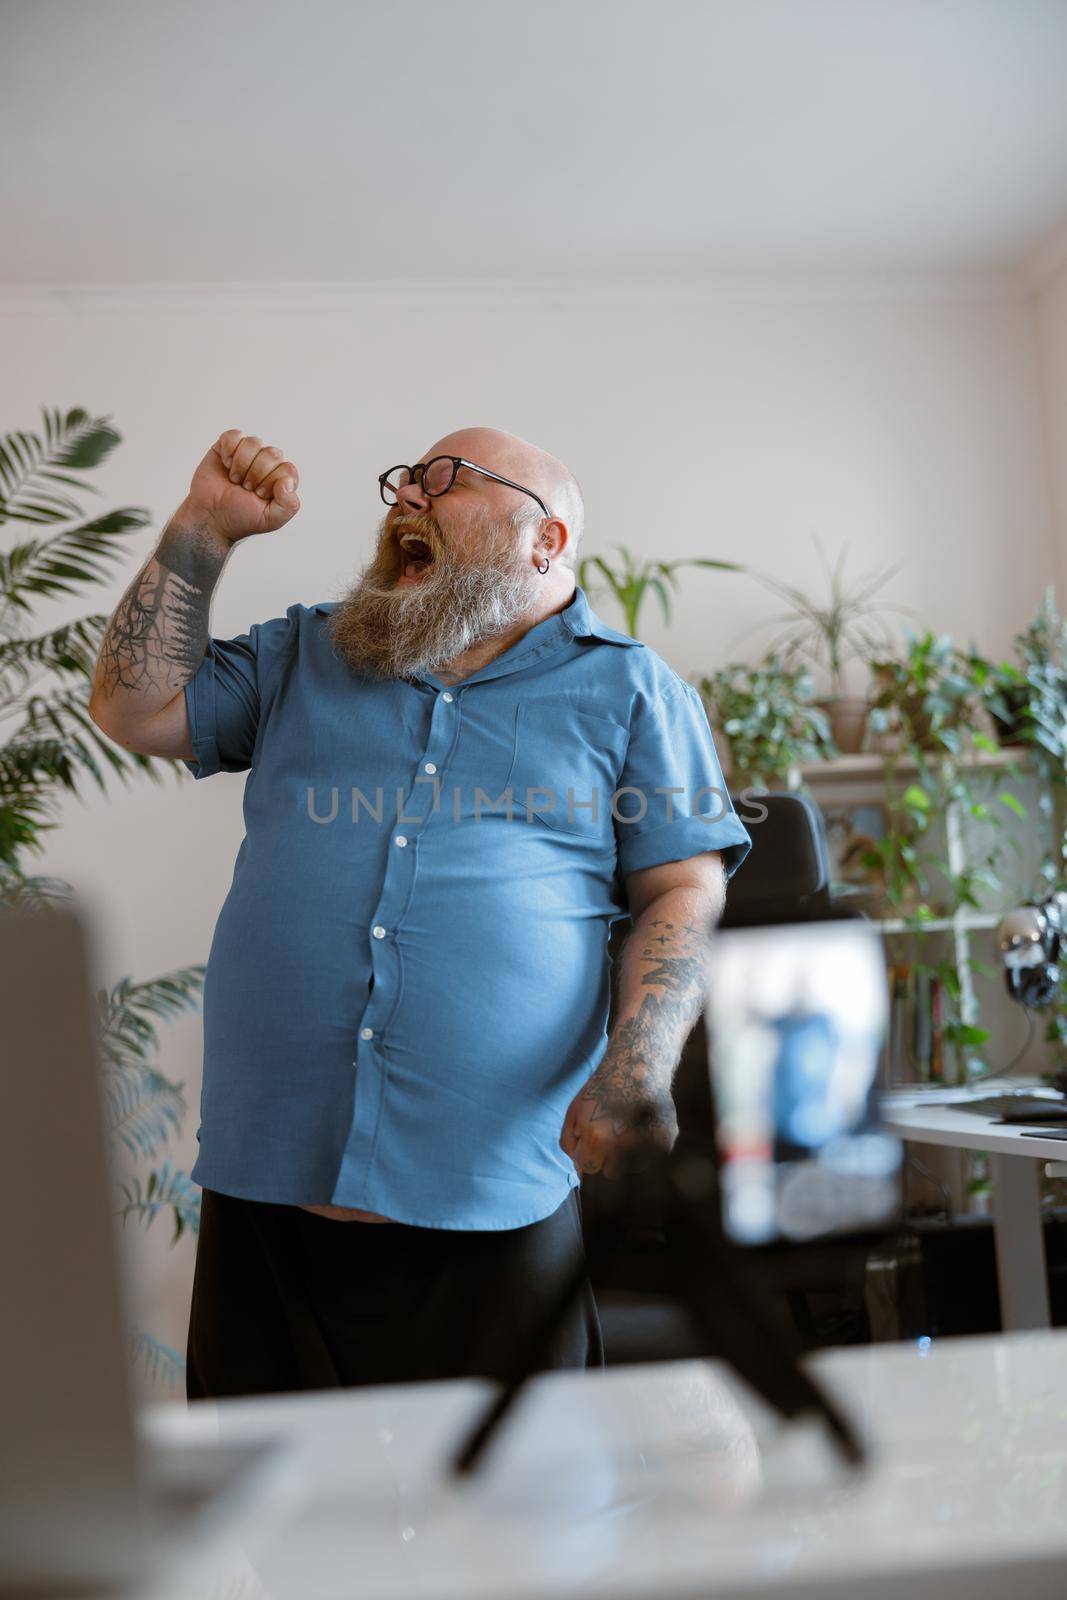 Expressive bearded man with overweight in tight blue shirt sings song recording new video for blog with smartphone at home